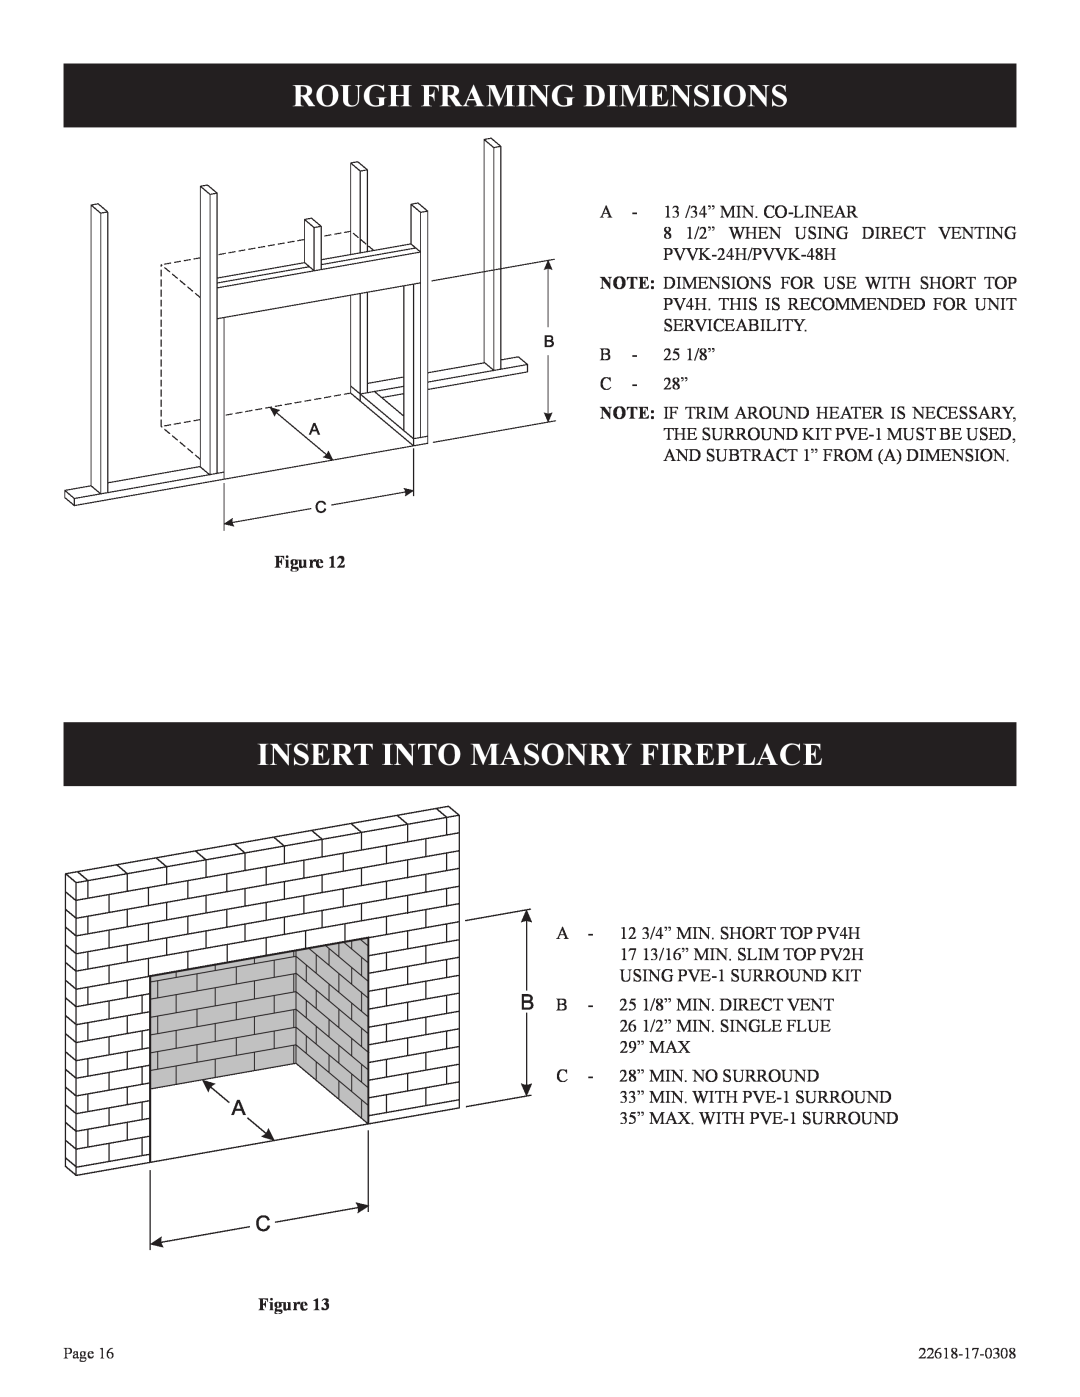 Empire Comfort Systems BP)-1, PV-28SV50-BN, PV-28SV55-CN, GN, GP)-1 Rough Framing Dimensions, Insert Into Masonry Fireplace 